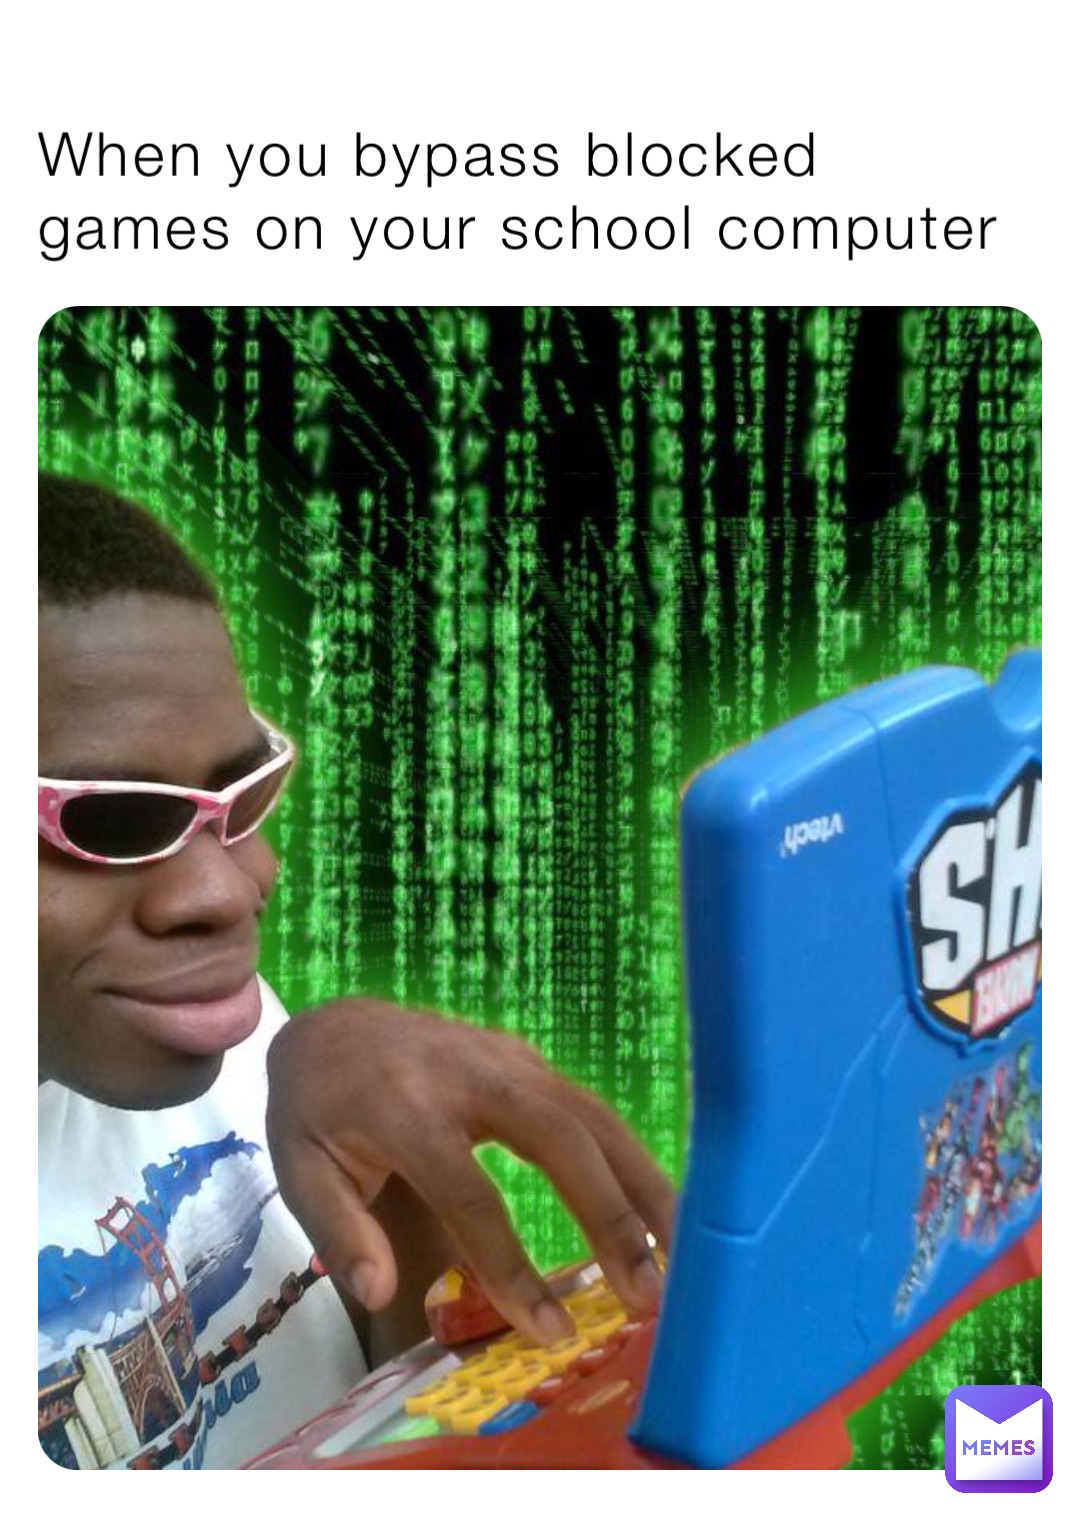 When you bypass blocked games on your school computer